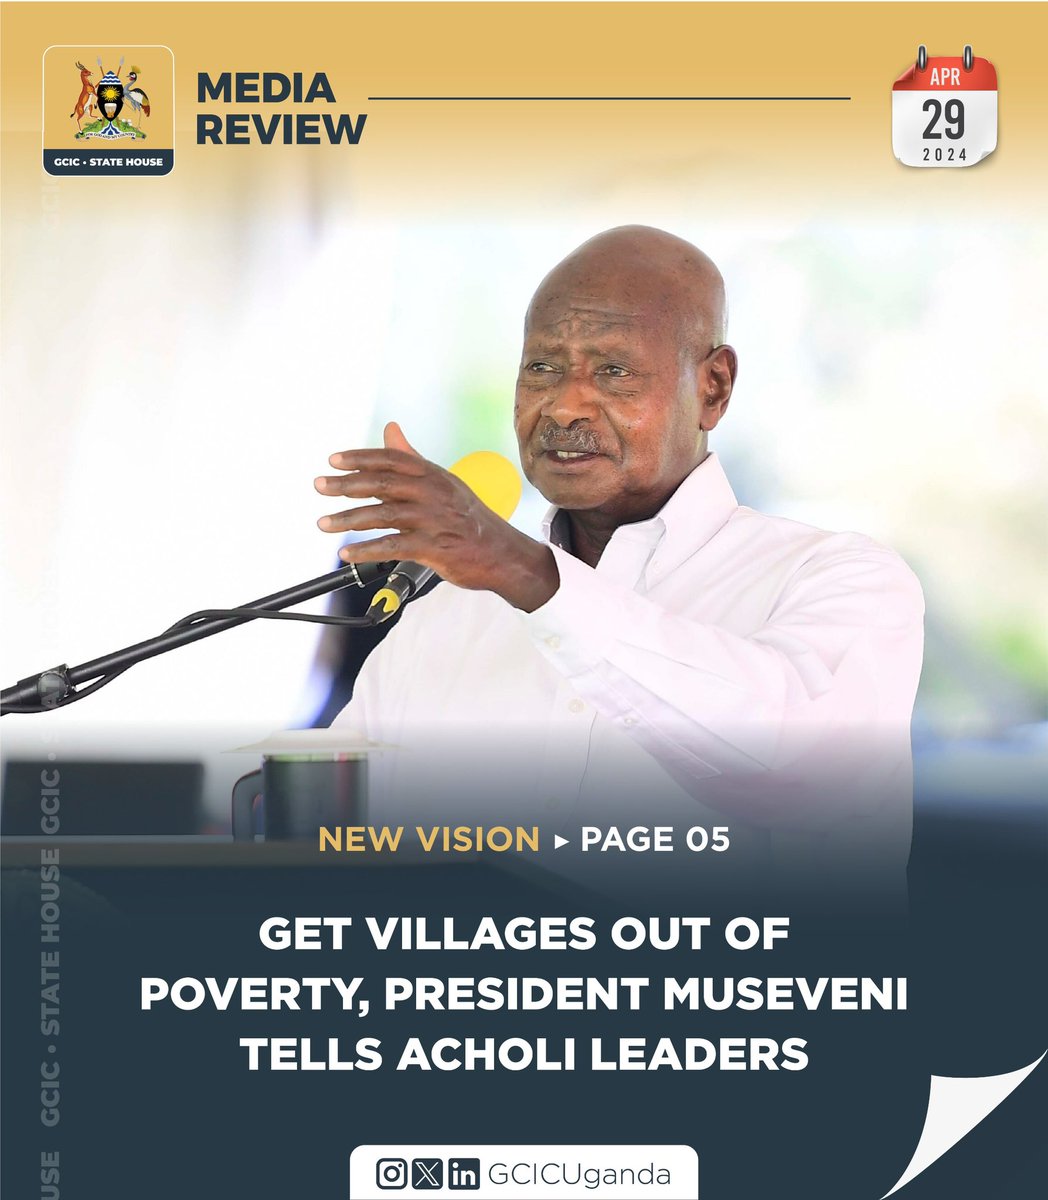 📌 @GovUganda has announced the release of an additional UGX 267 billion in PDM funds. Uganda set to supply maize Zambia ▶️President Museveni has urgedAcholi leaders to work towards lifting villages out of poverty. ▶️These and more via the link below media.gcic.go.ug/gcicmediarevie…